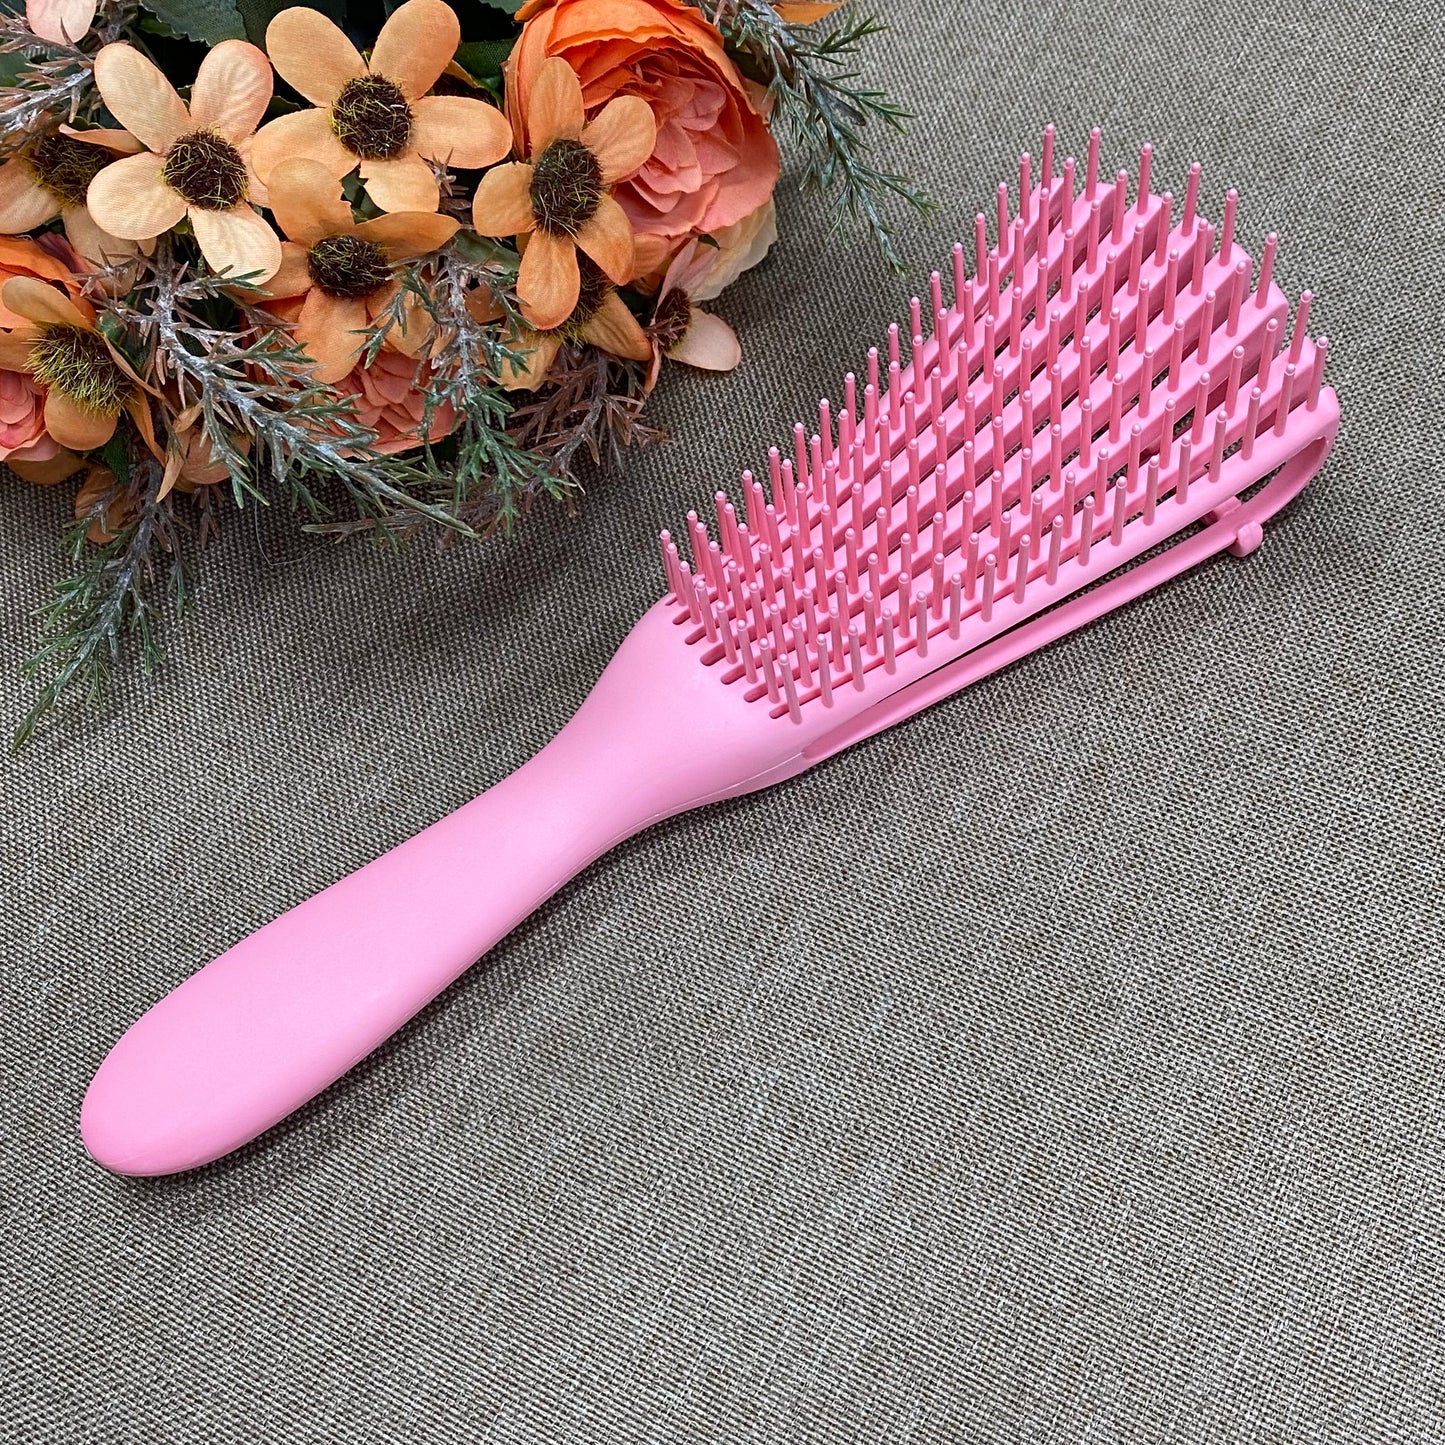 Detangling Hair Brush Pink Black Massage Wet Hair Comb Octopus Hair Brush Comb Detangling Brush Kinky Wavy for Thick Curly Hair